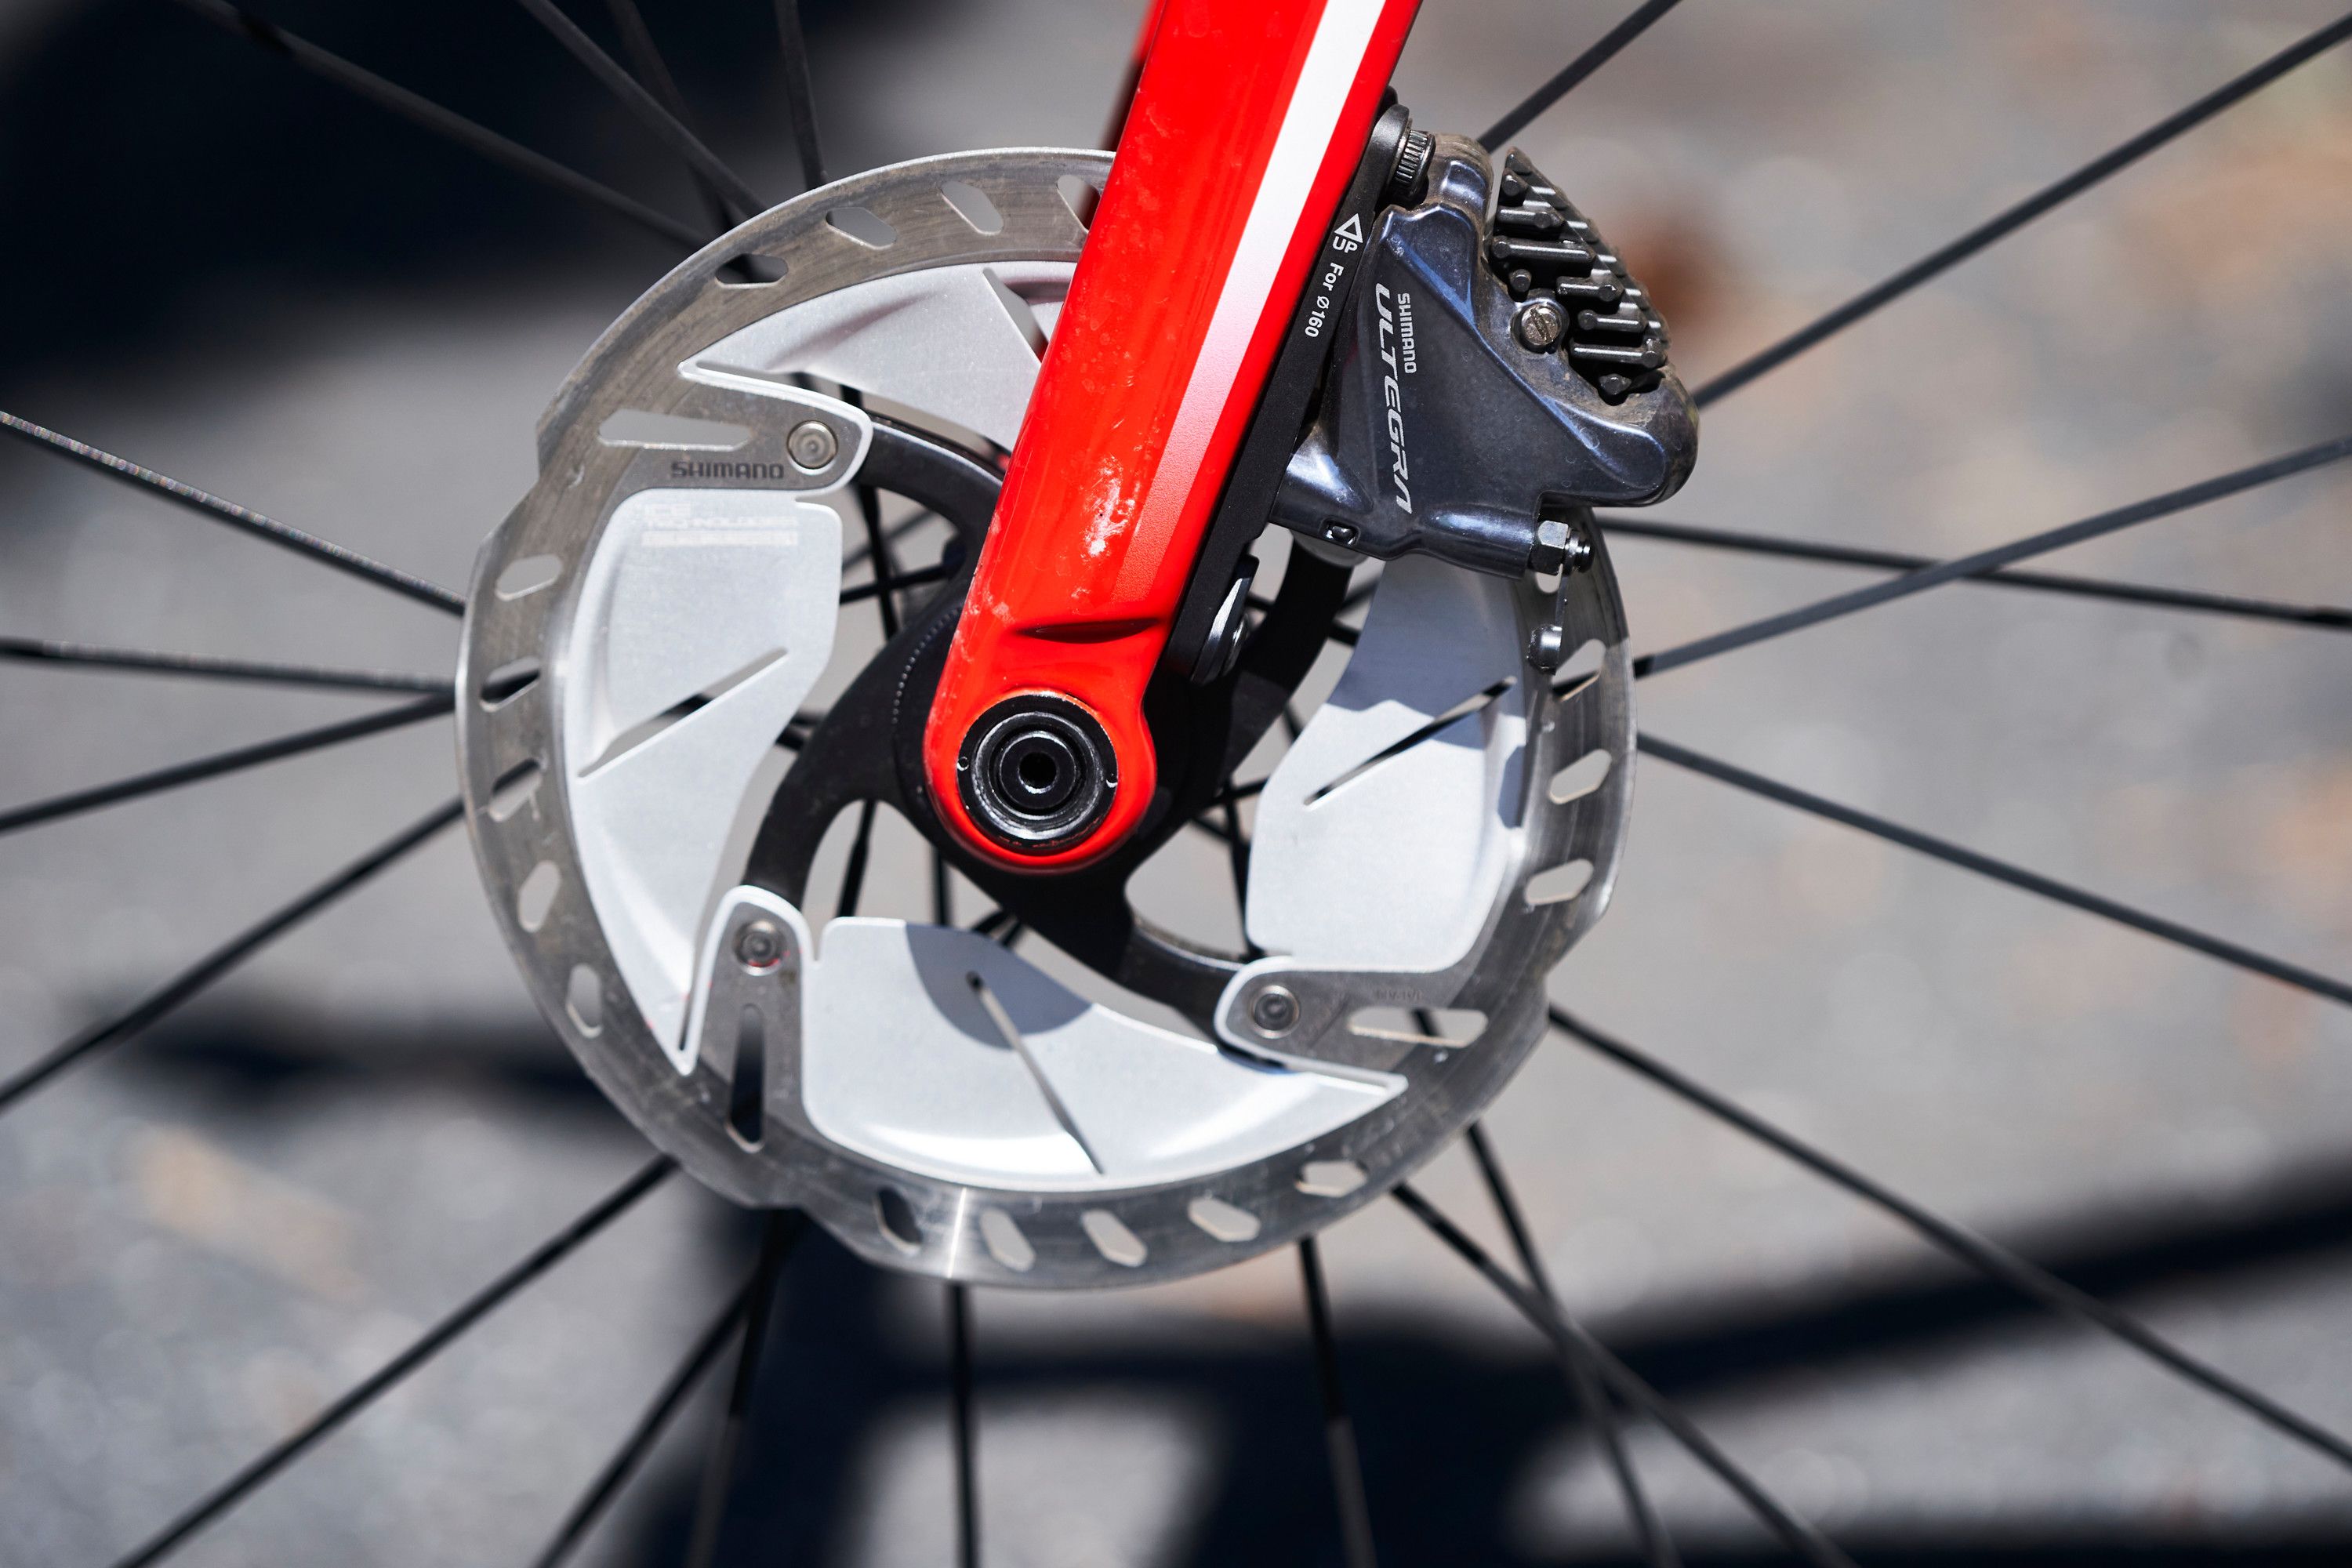 Mechanical Disc Brakes Price Hot Sale, 58% OFF | empow-her.com